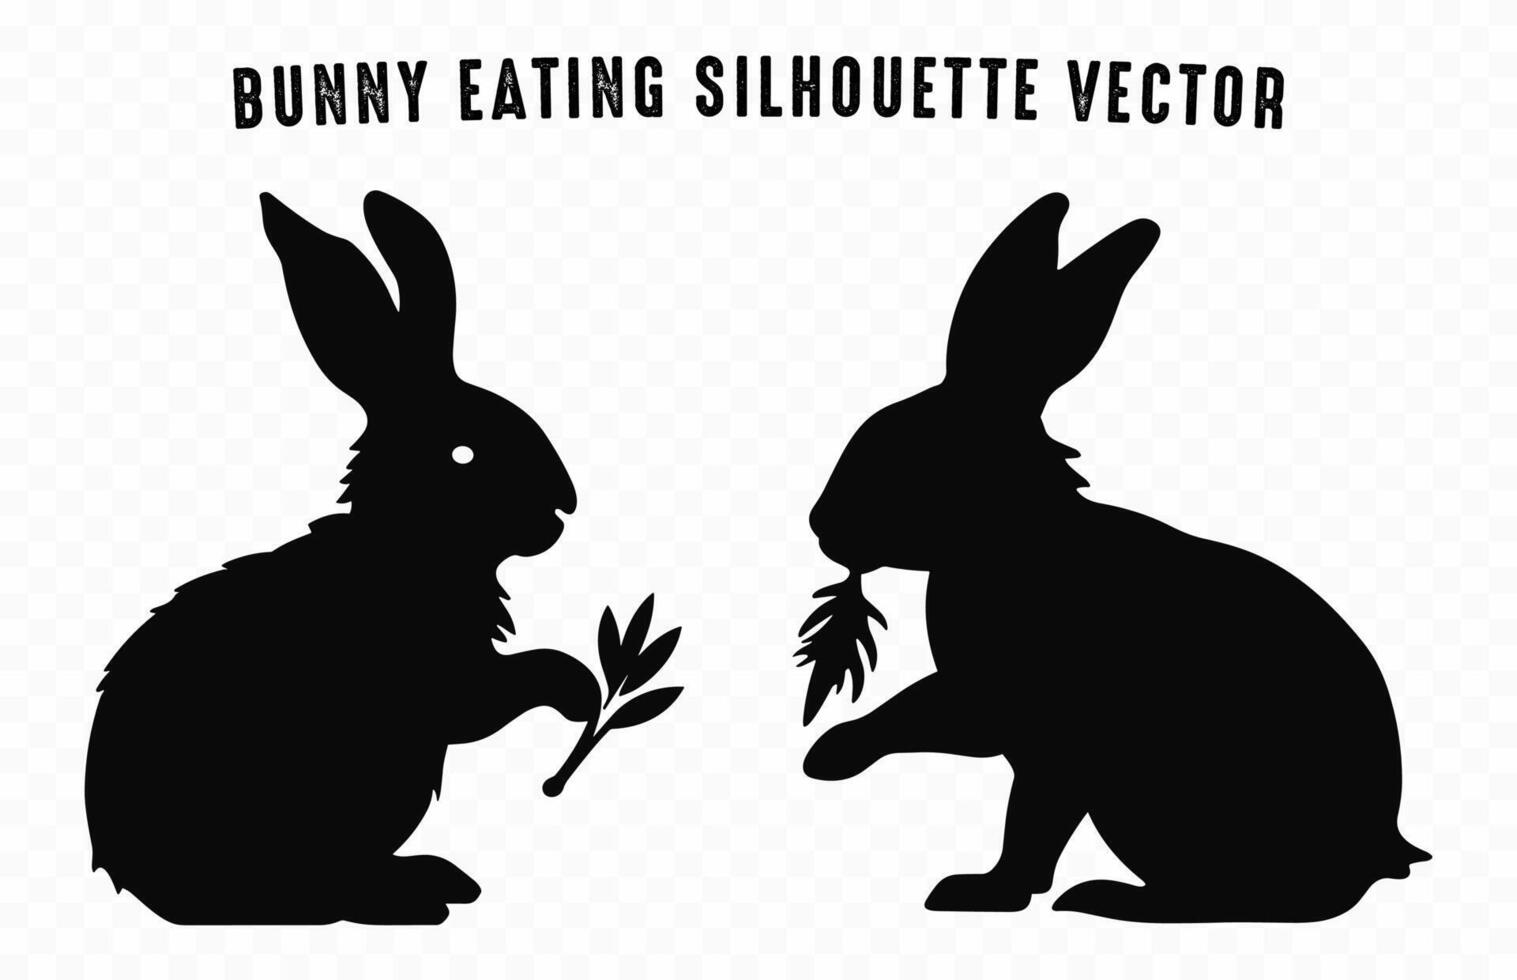 Easter Bunny Eating silhouette vector isolated on a white background